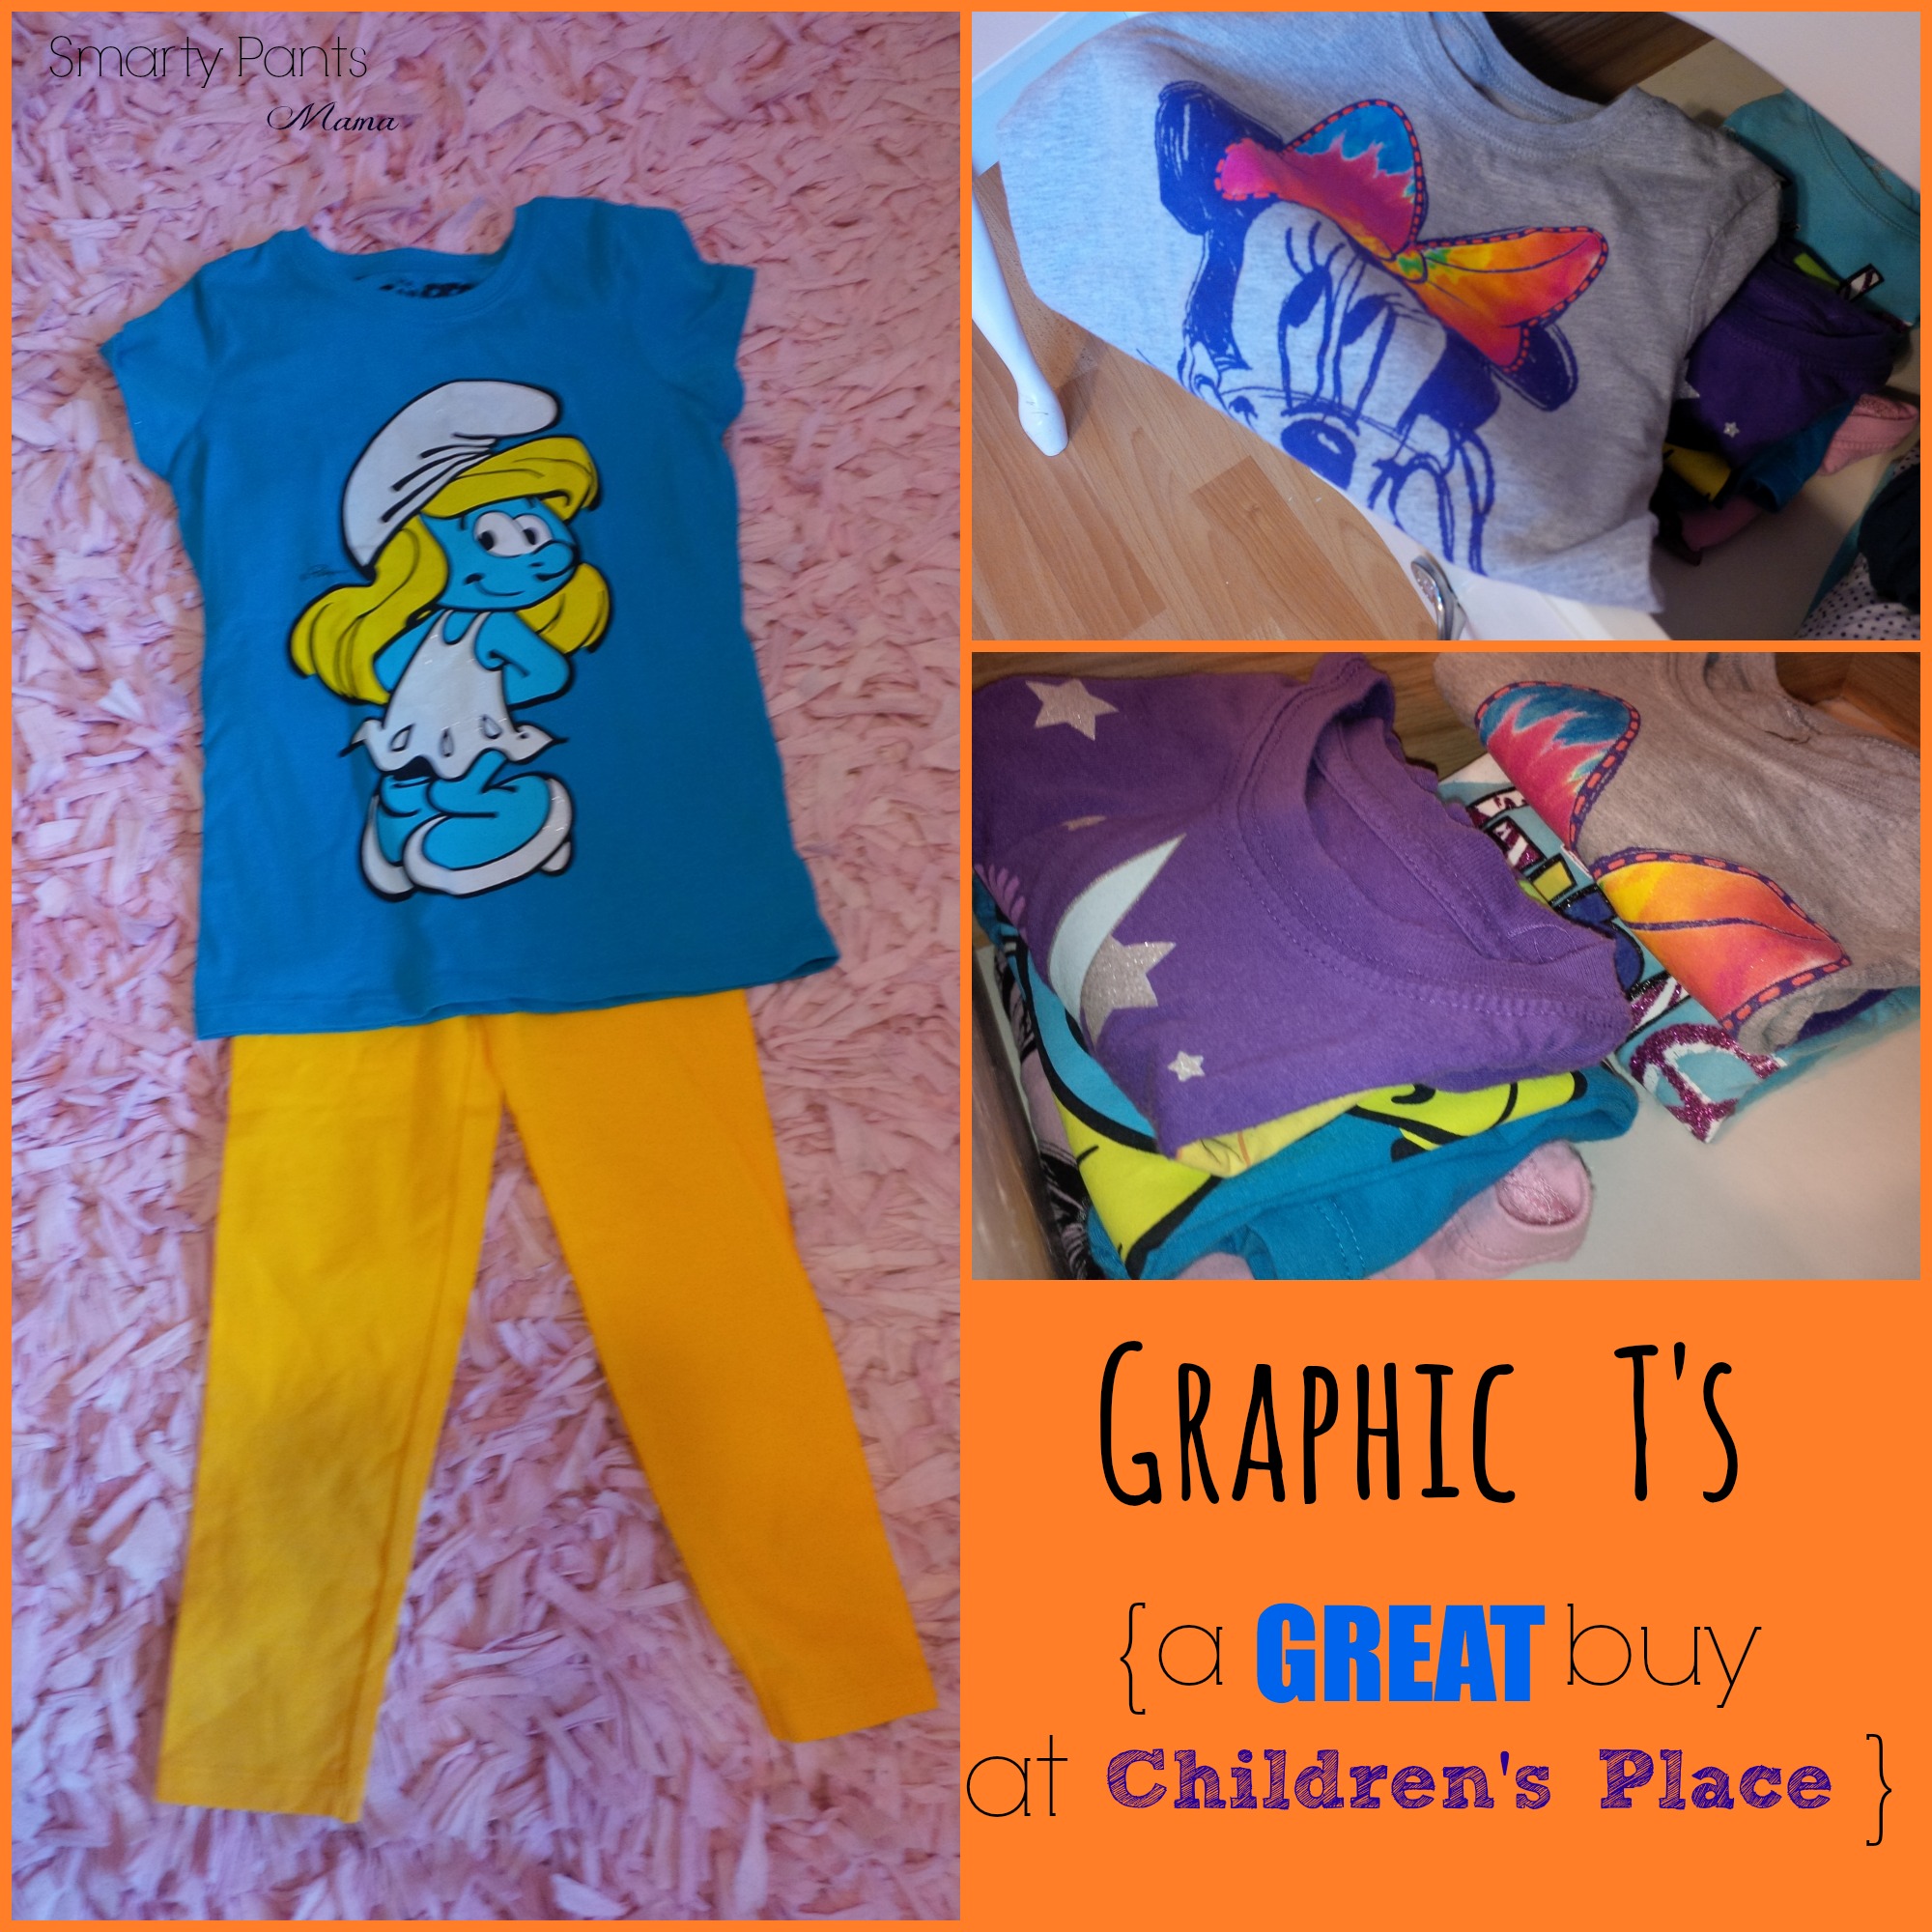 Using Graphic T-Shirts in a Kids’ Wardrobe